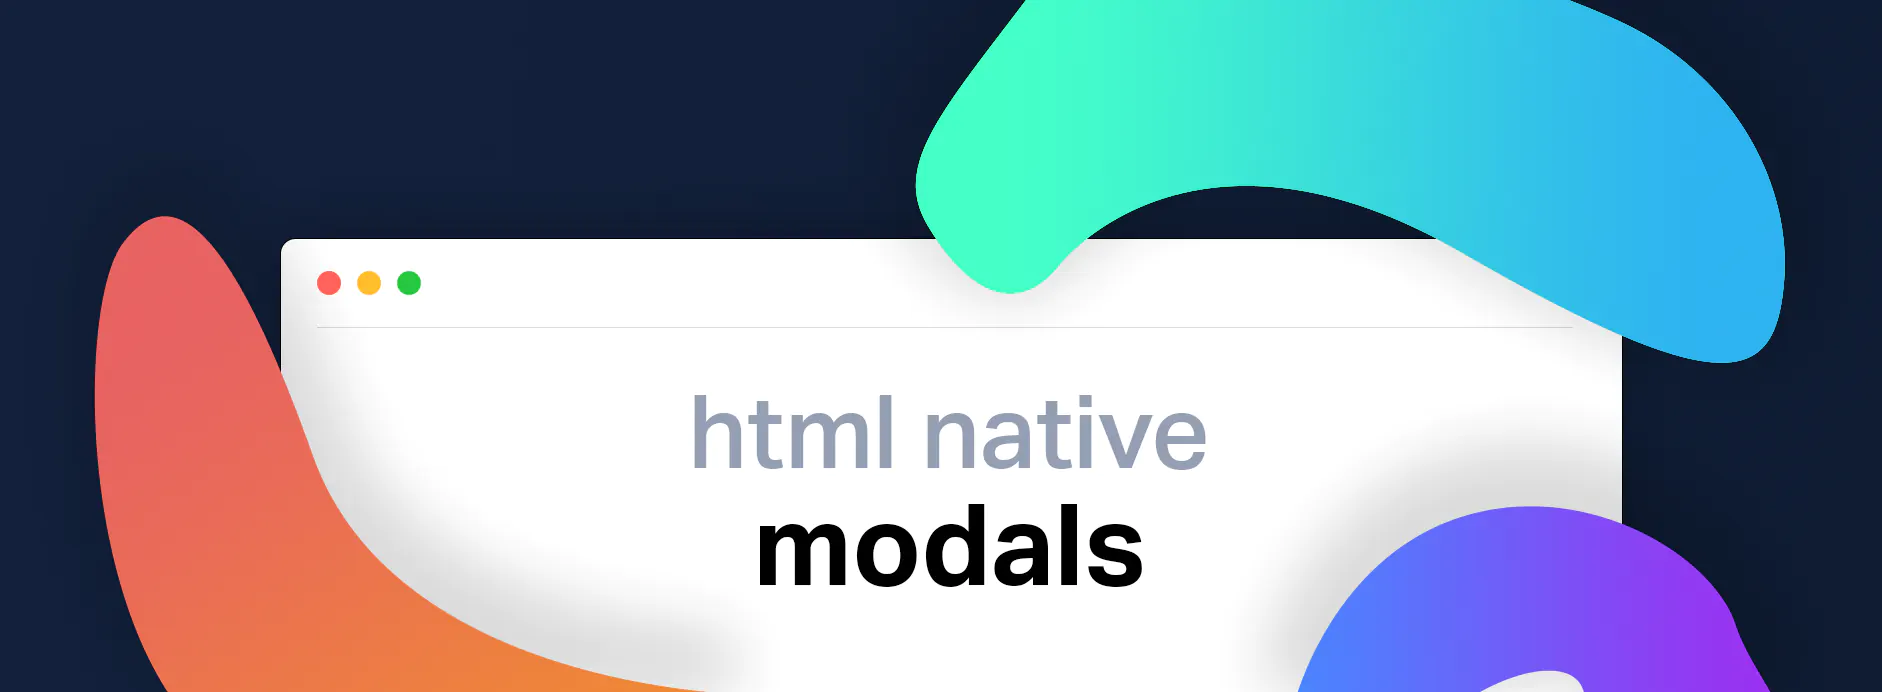 New HTML Native Modals, Without the Fuss